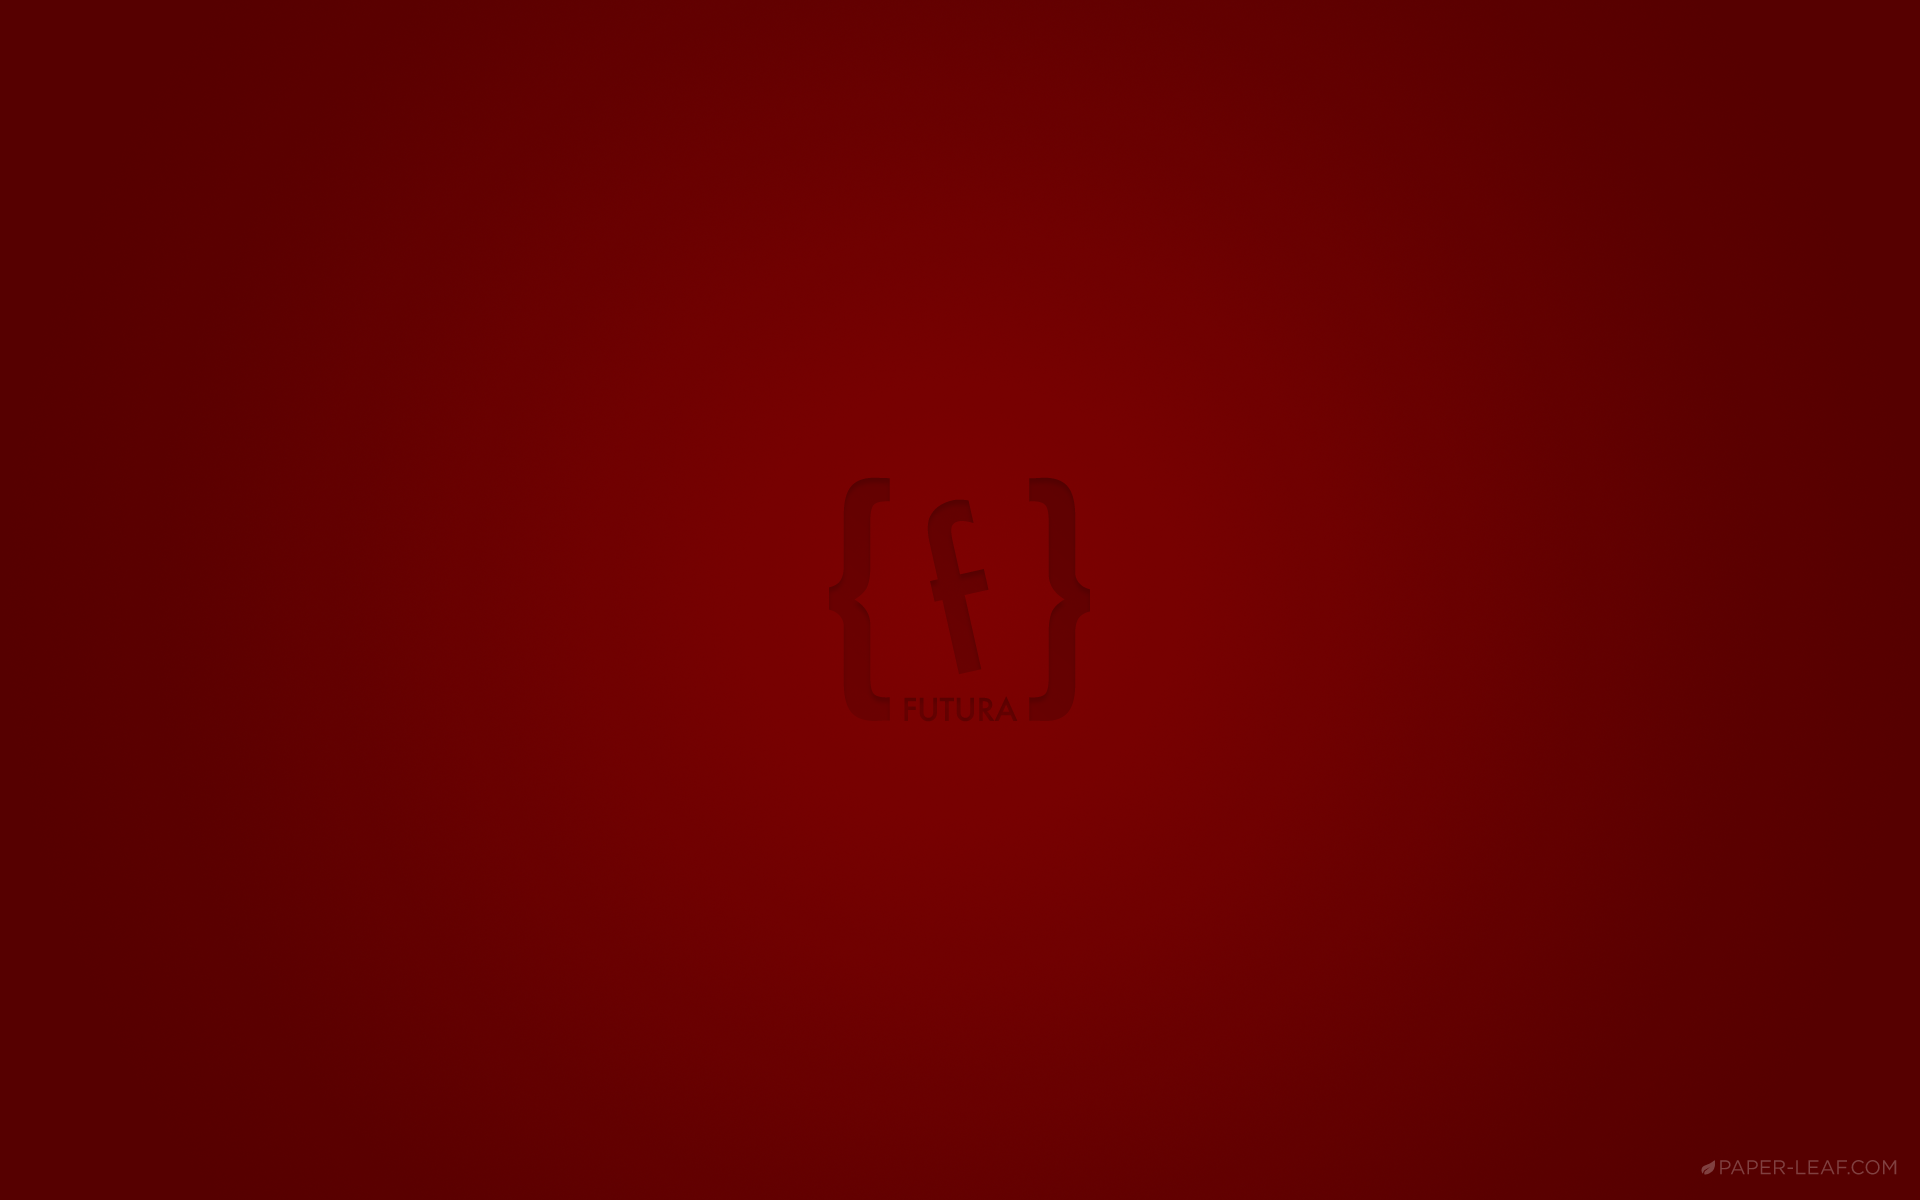 Dark Red With Black HD Red Aesthetic Wallpapers  HD Wallpapers  ID 56019